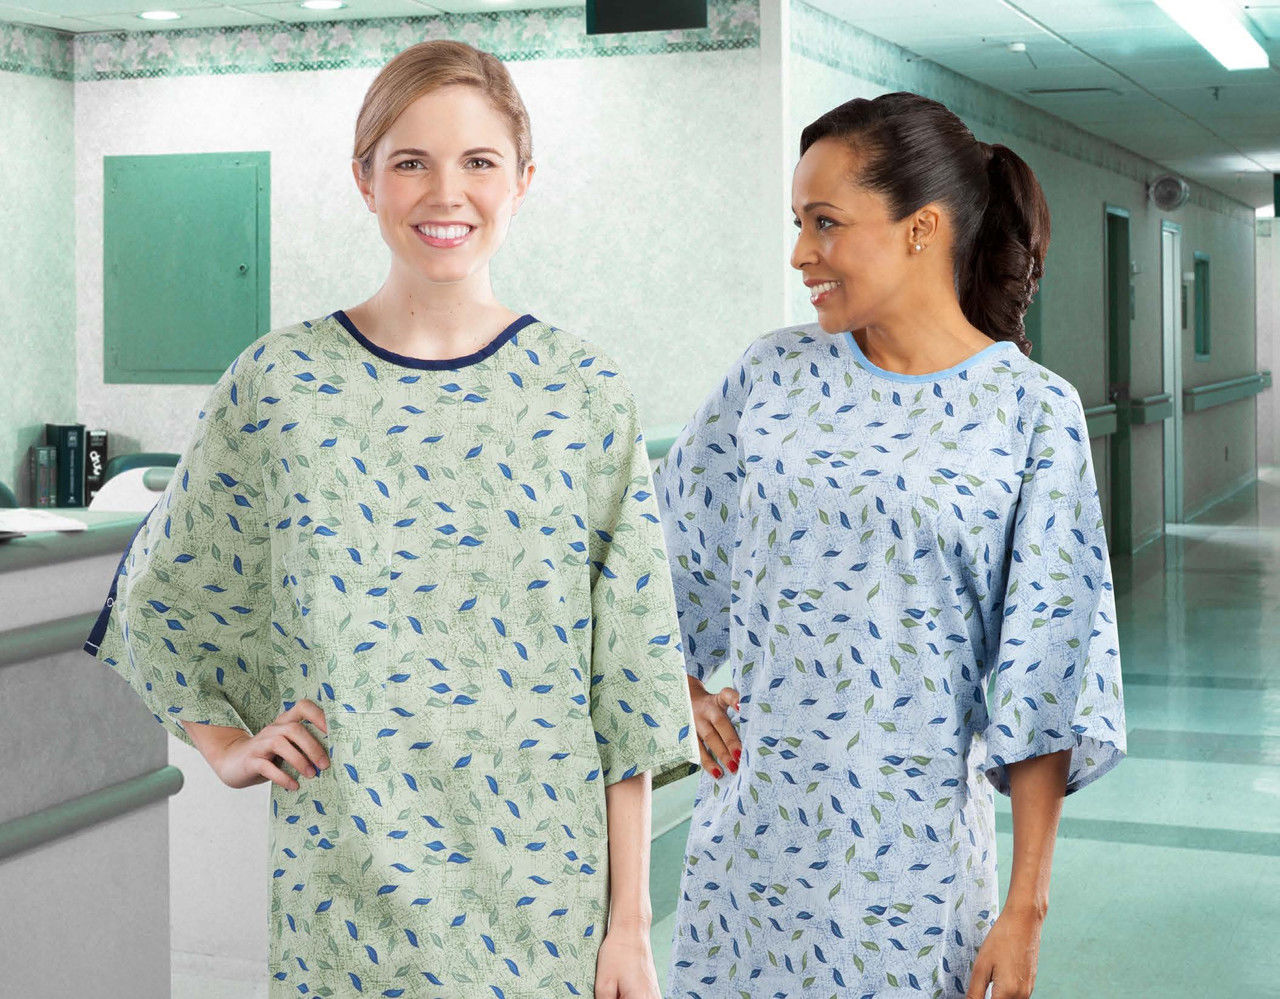 Are the polyester patient gowns from American Dawn (ADI) comfortable and durable?